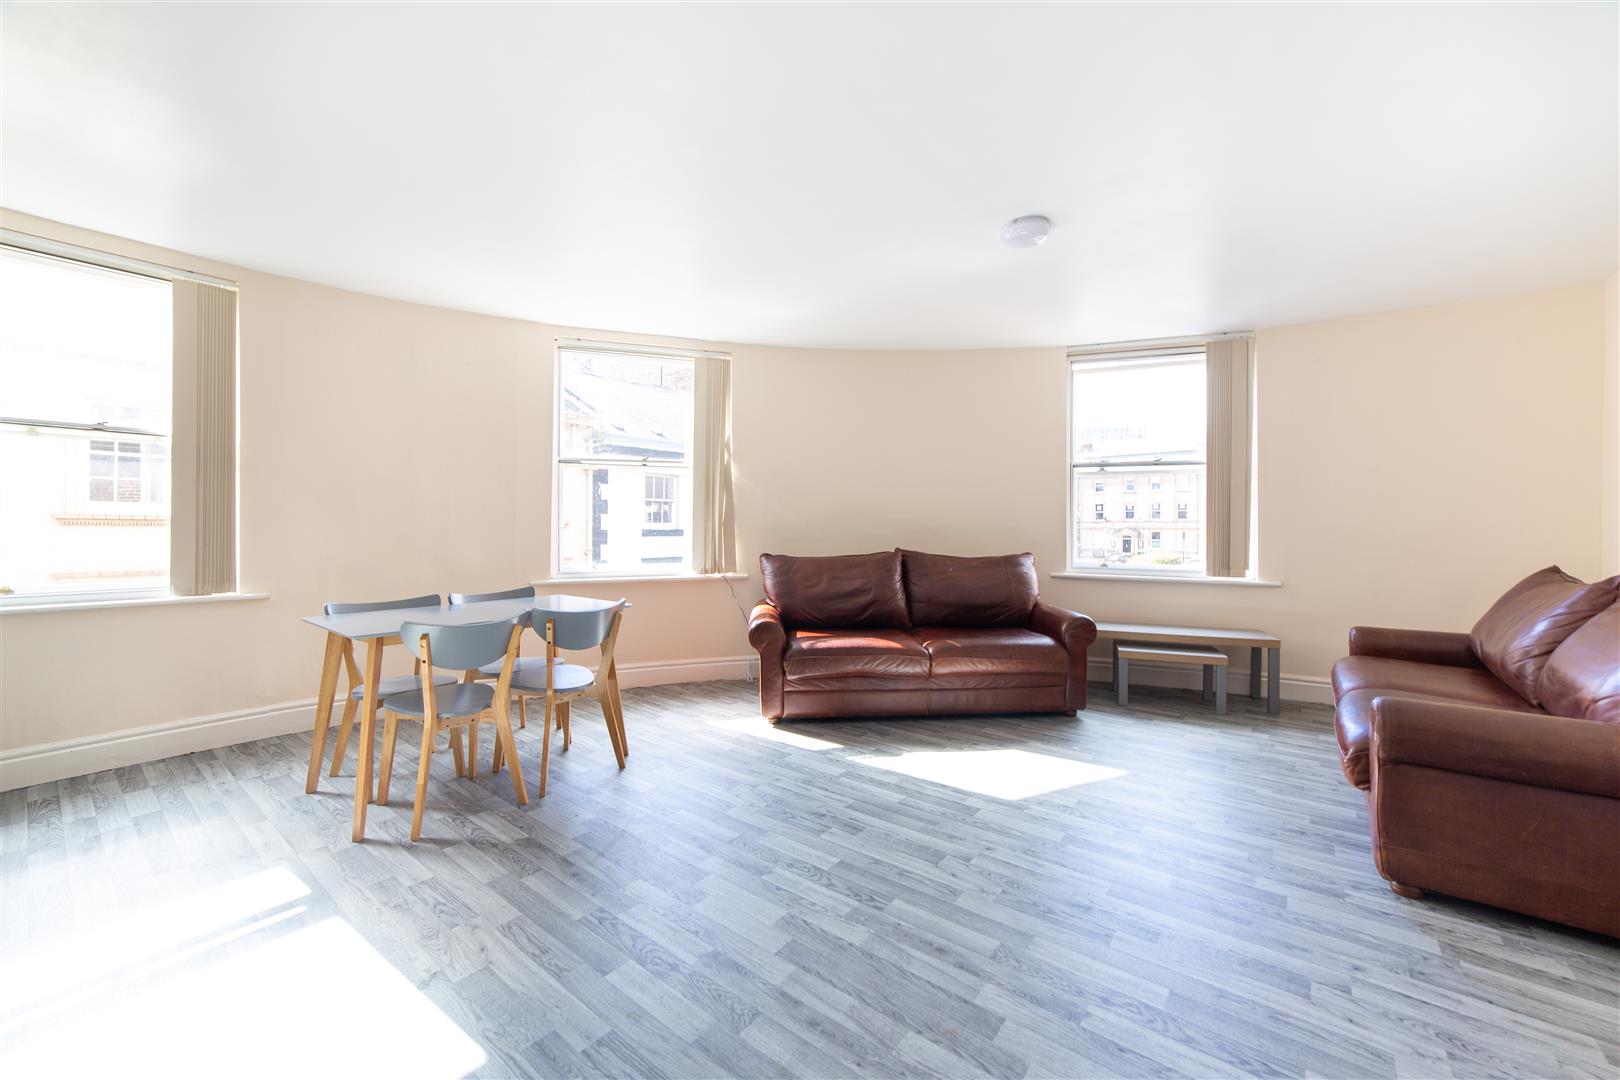 4 bed apartment to rent in Fenkle Street, Newcastle Upon Tyne 3